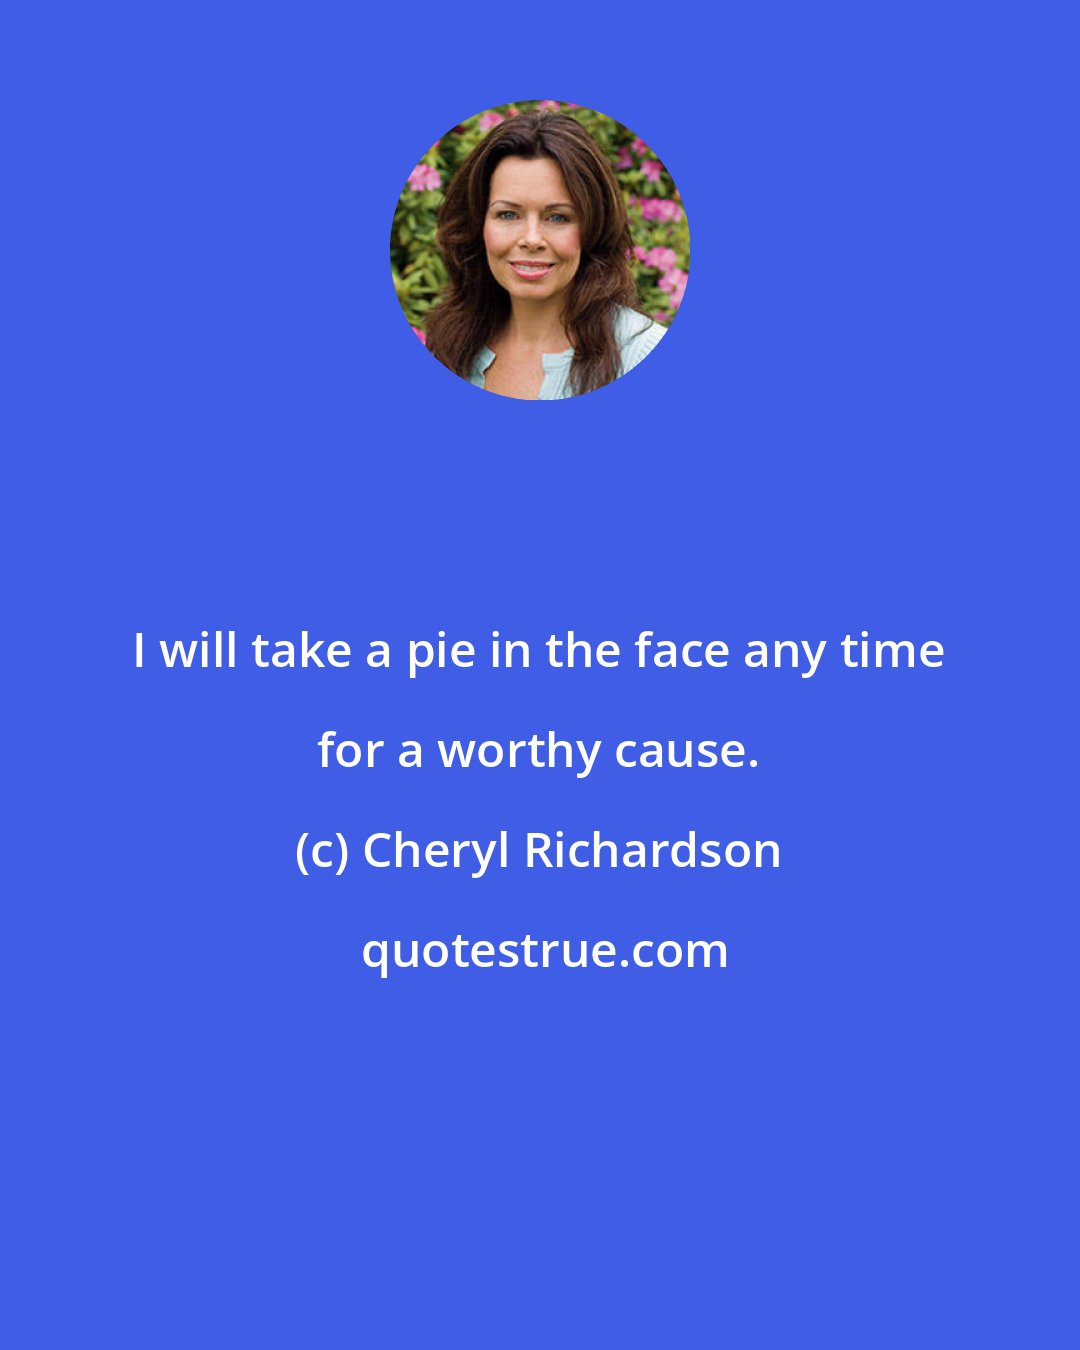 Cheryl Richardson: I will take a pie in the face any time for a worthy cause.